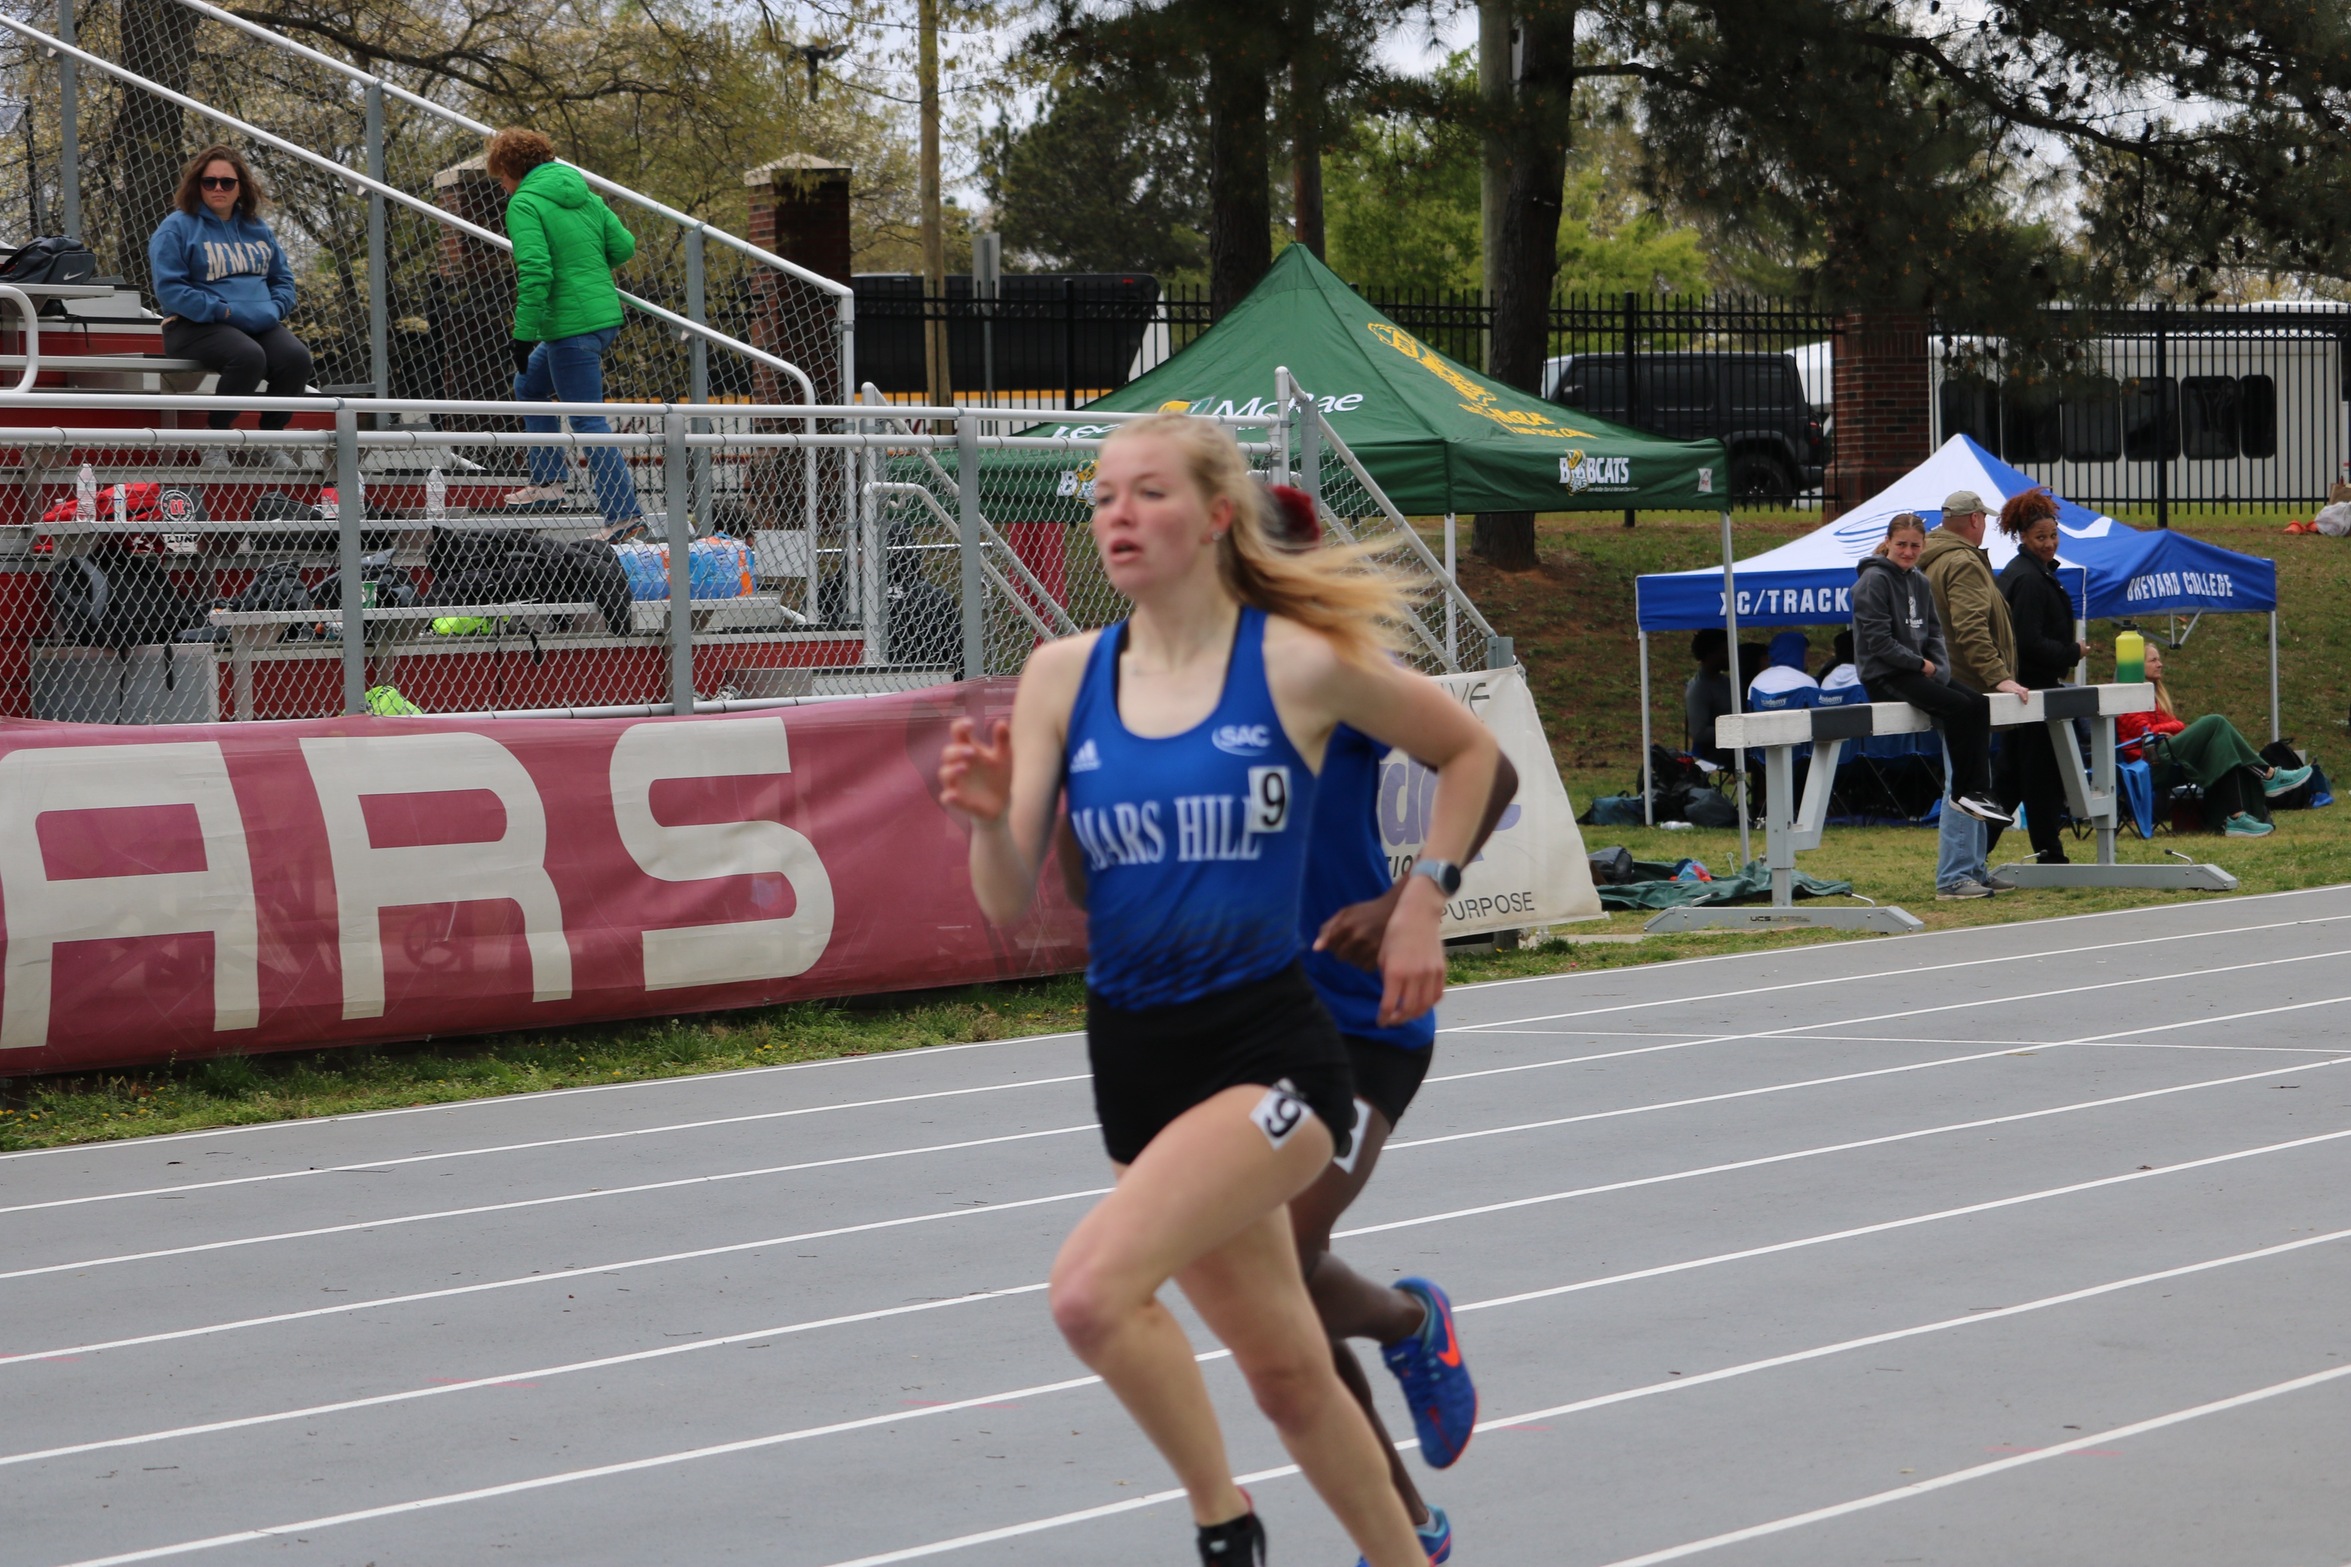 Mars Hill competes at Montreat Invitational